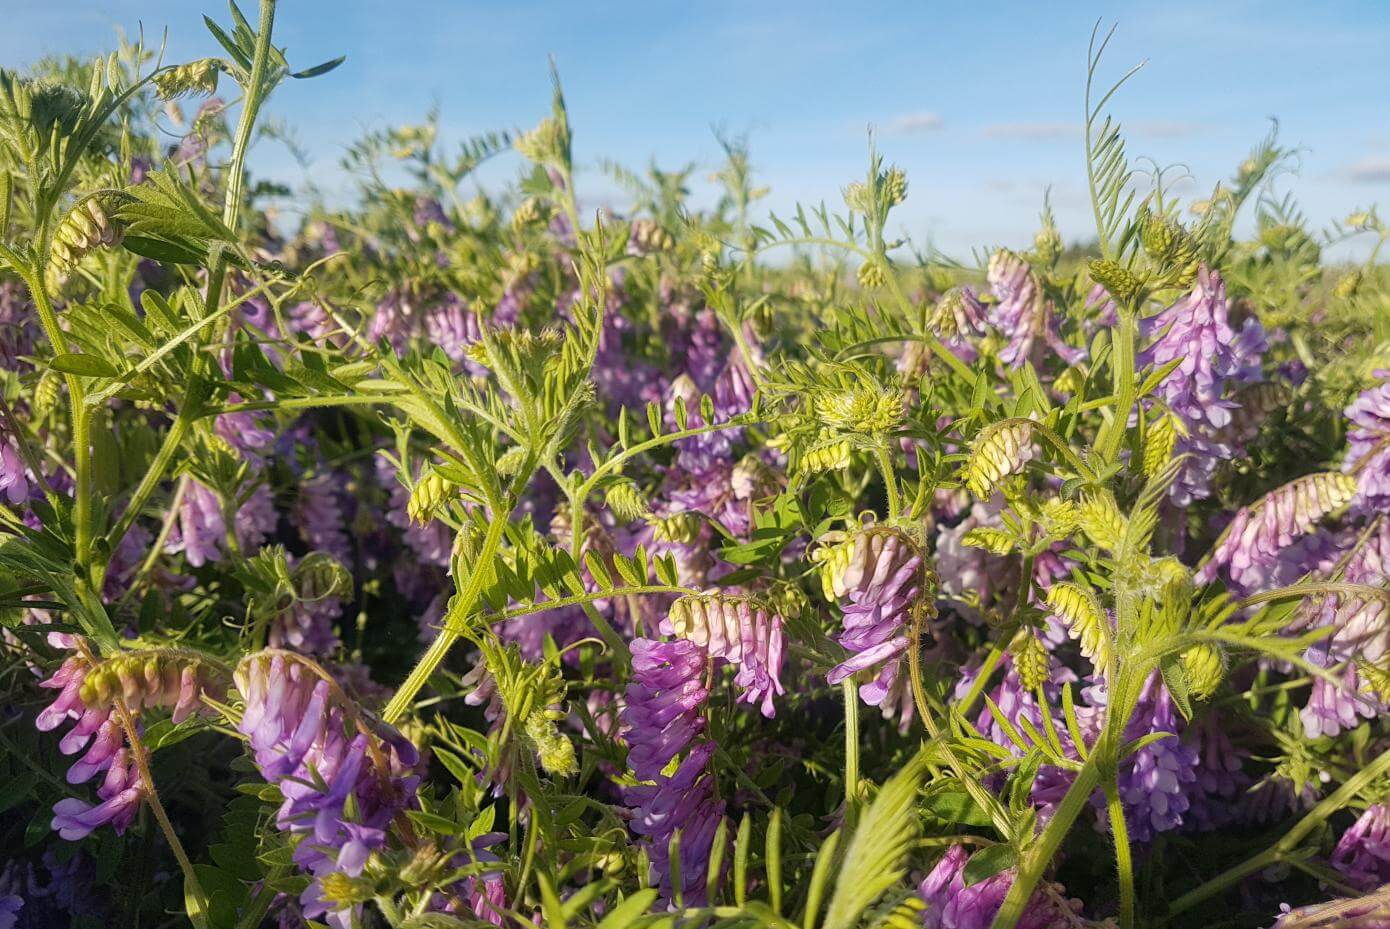 Patagonia Inta hairy vetch plants and flowers in a field